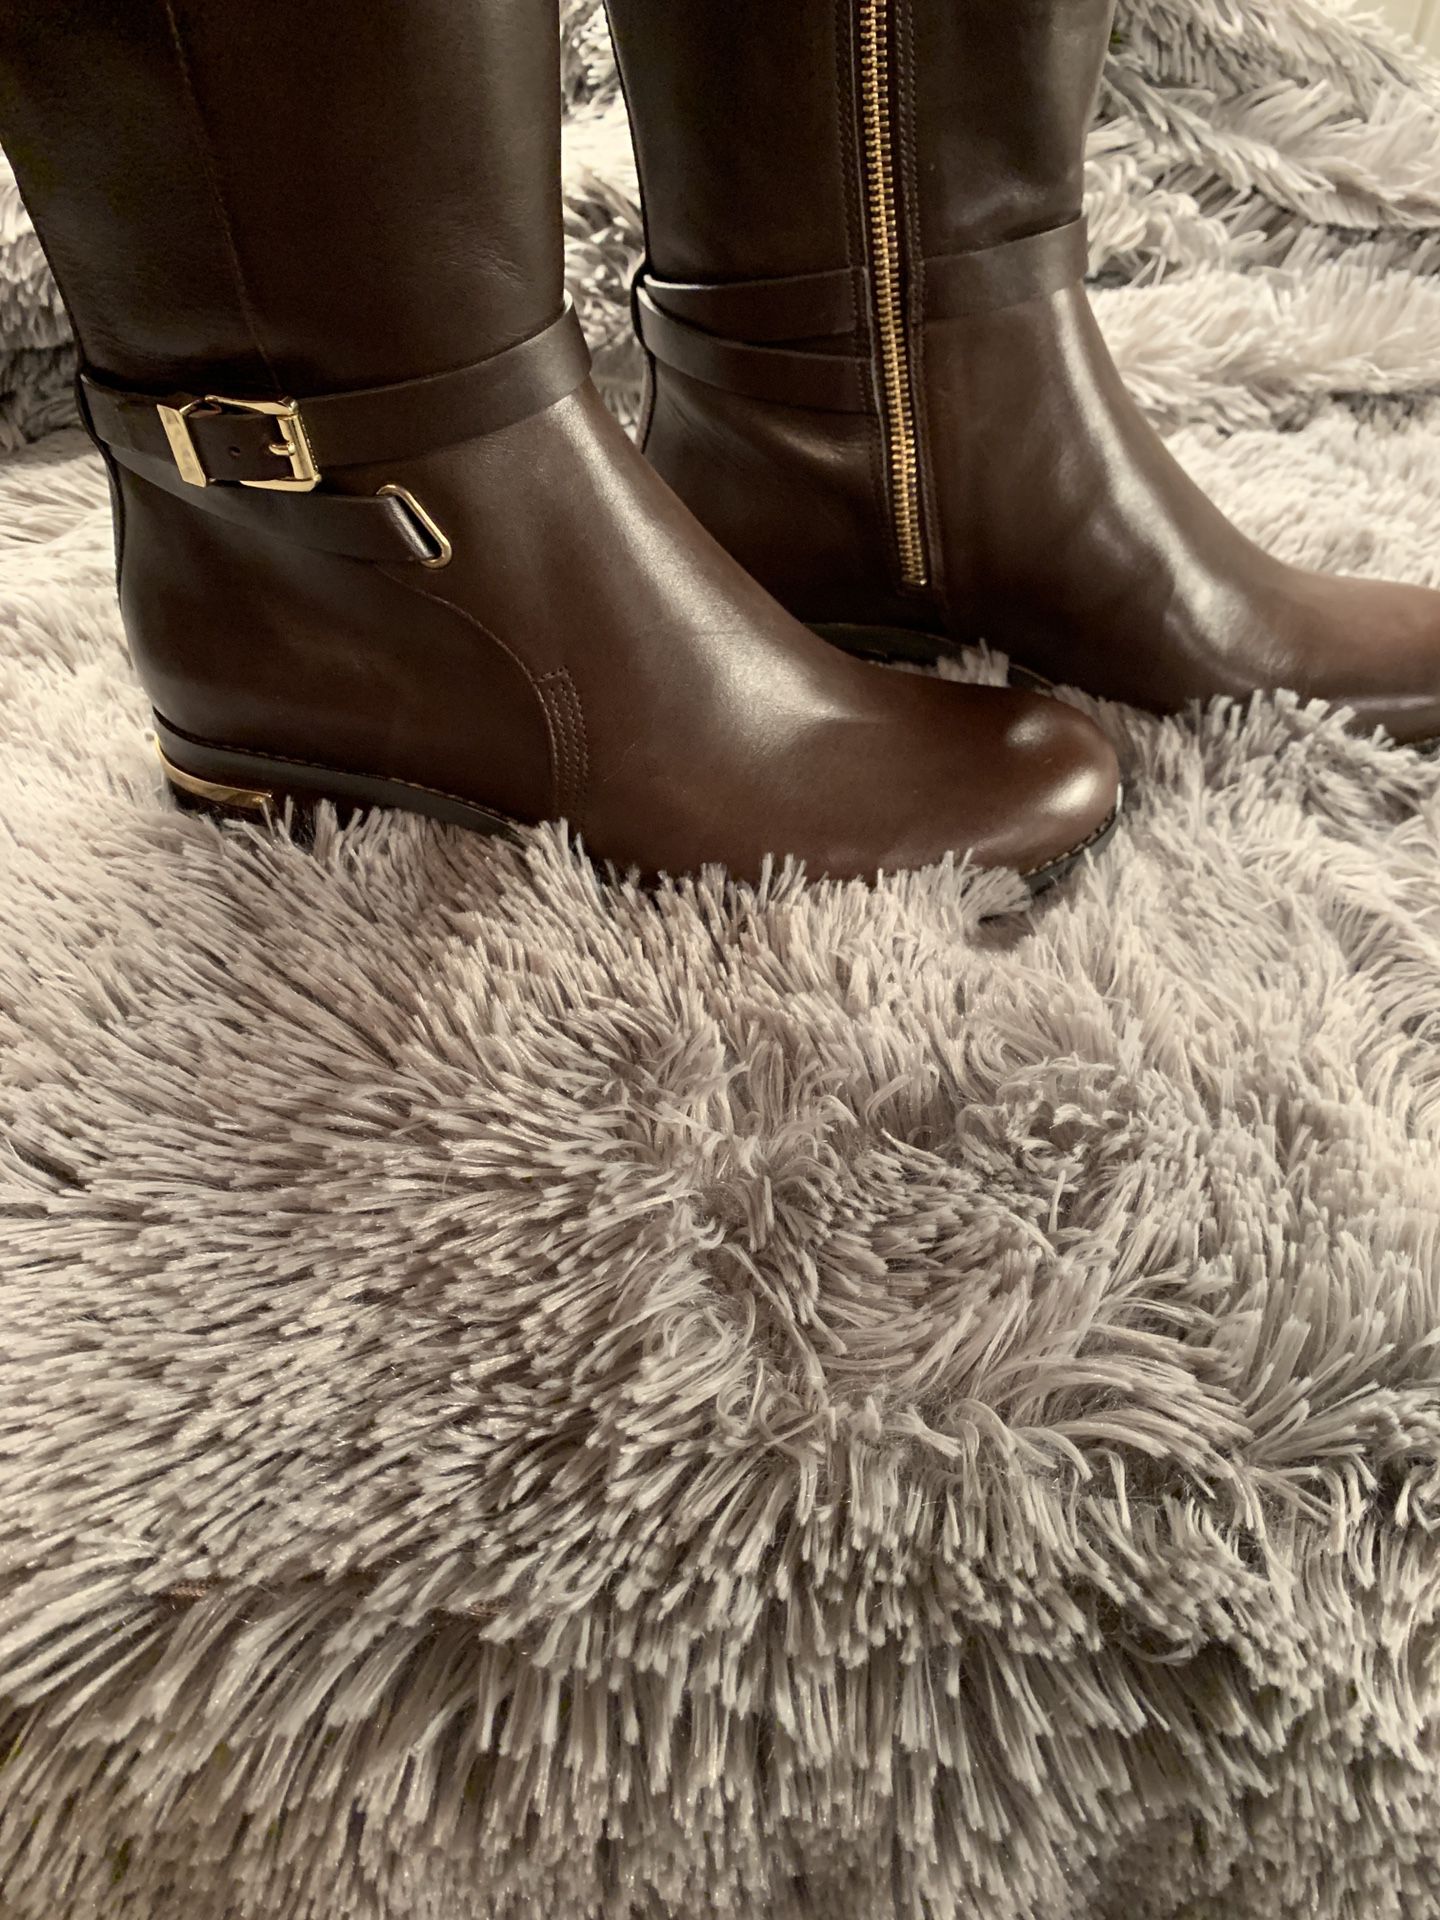 Michael Kors Arley Leather Riding Boots